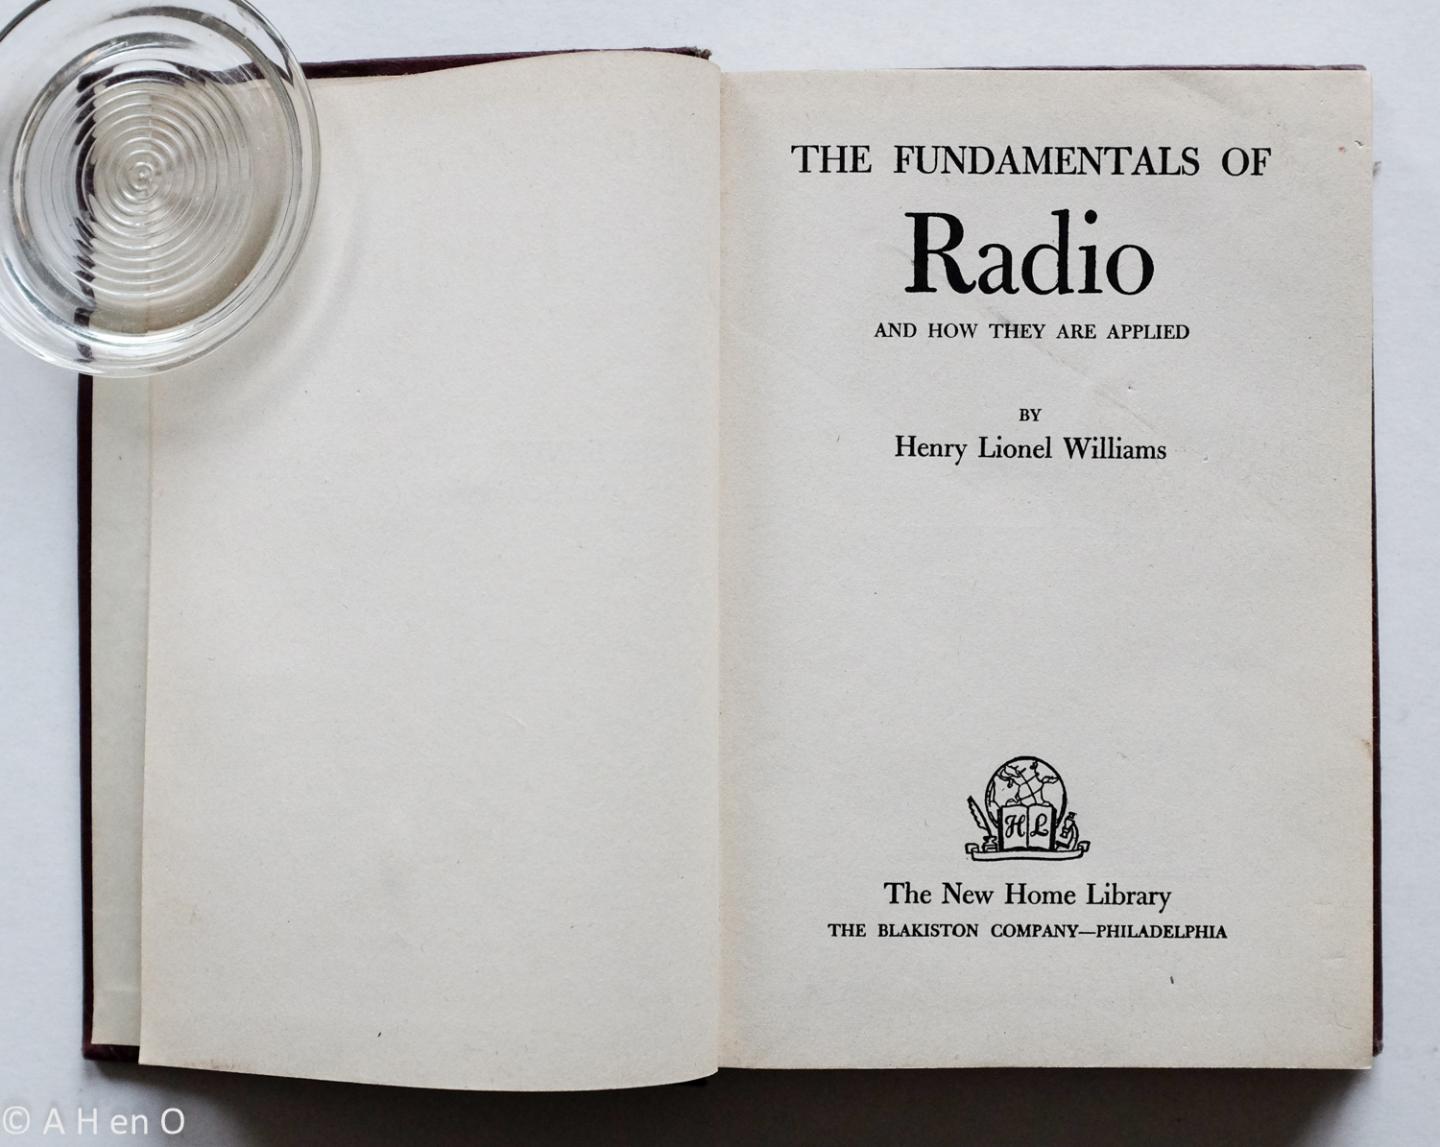 Williams, Henry Lionel - The fundamentals of radio and how they are applied